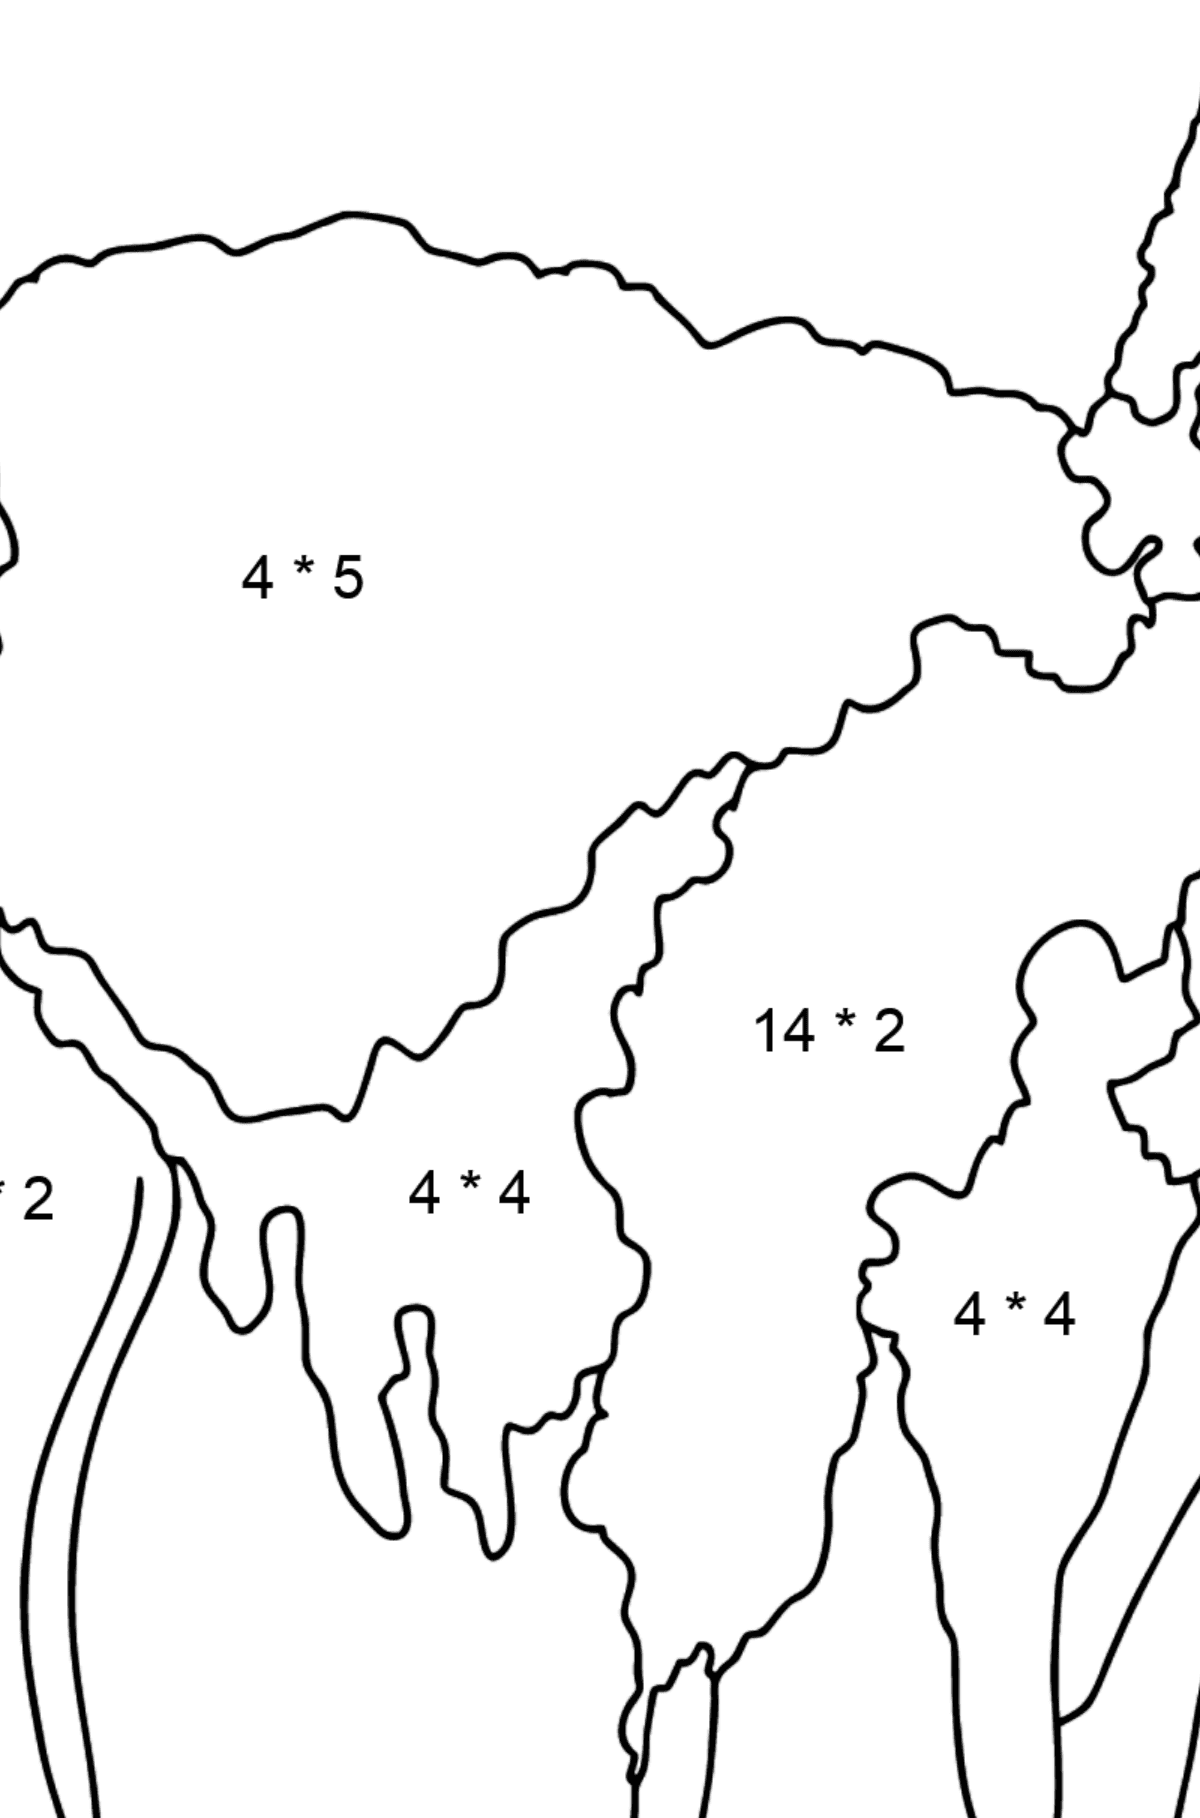 Coloring Page - A Lama is Looking Haughtily - Math Coloring - Multiplication for Kids